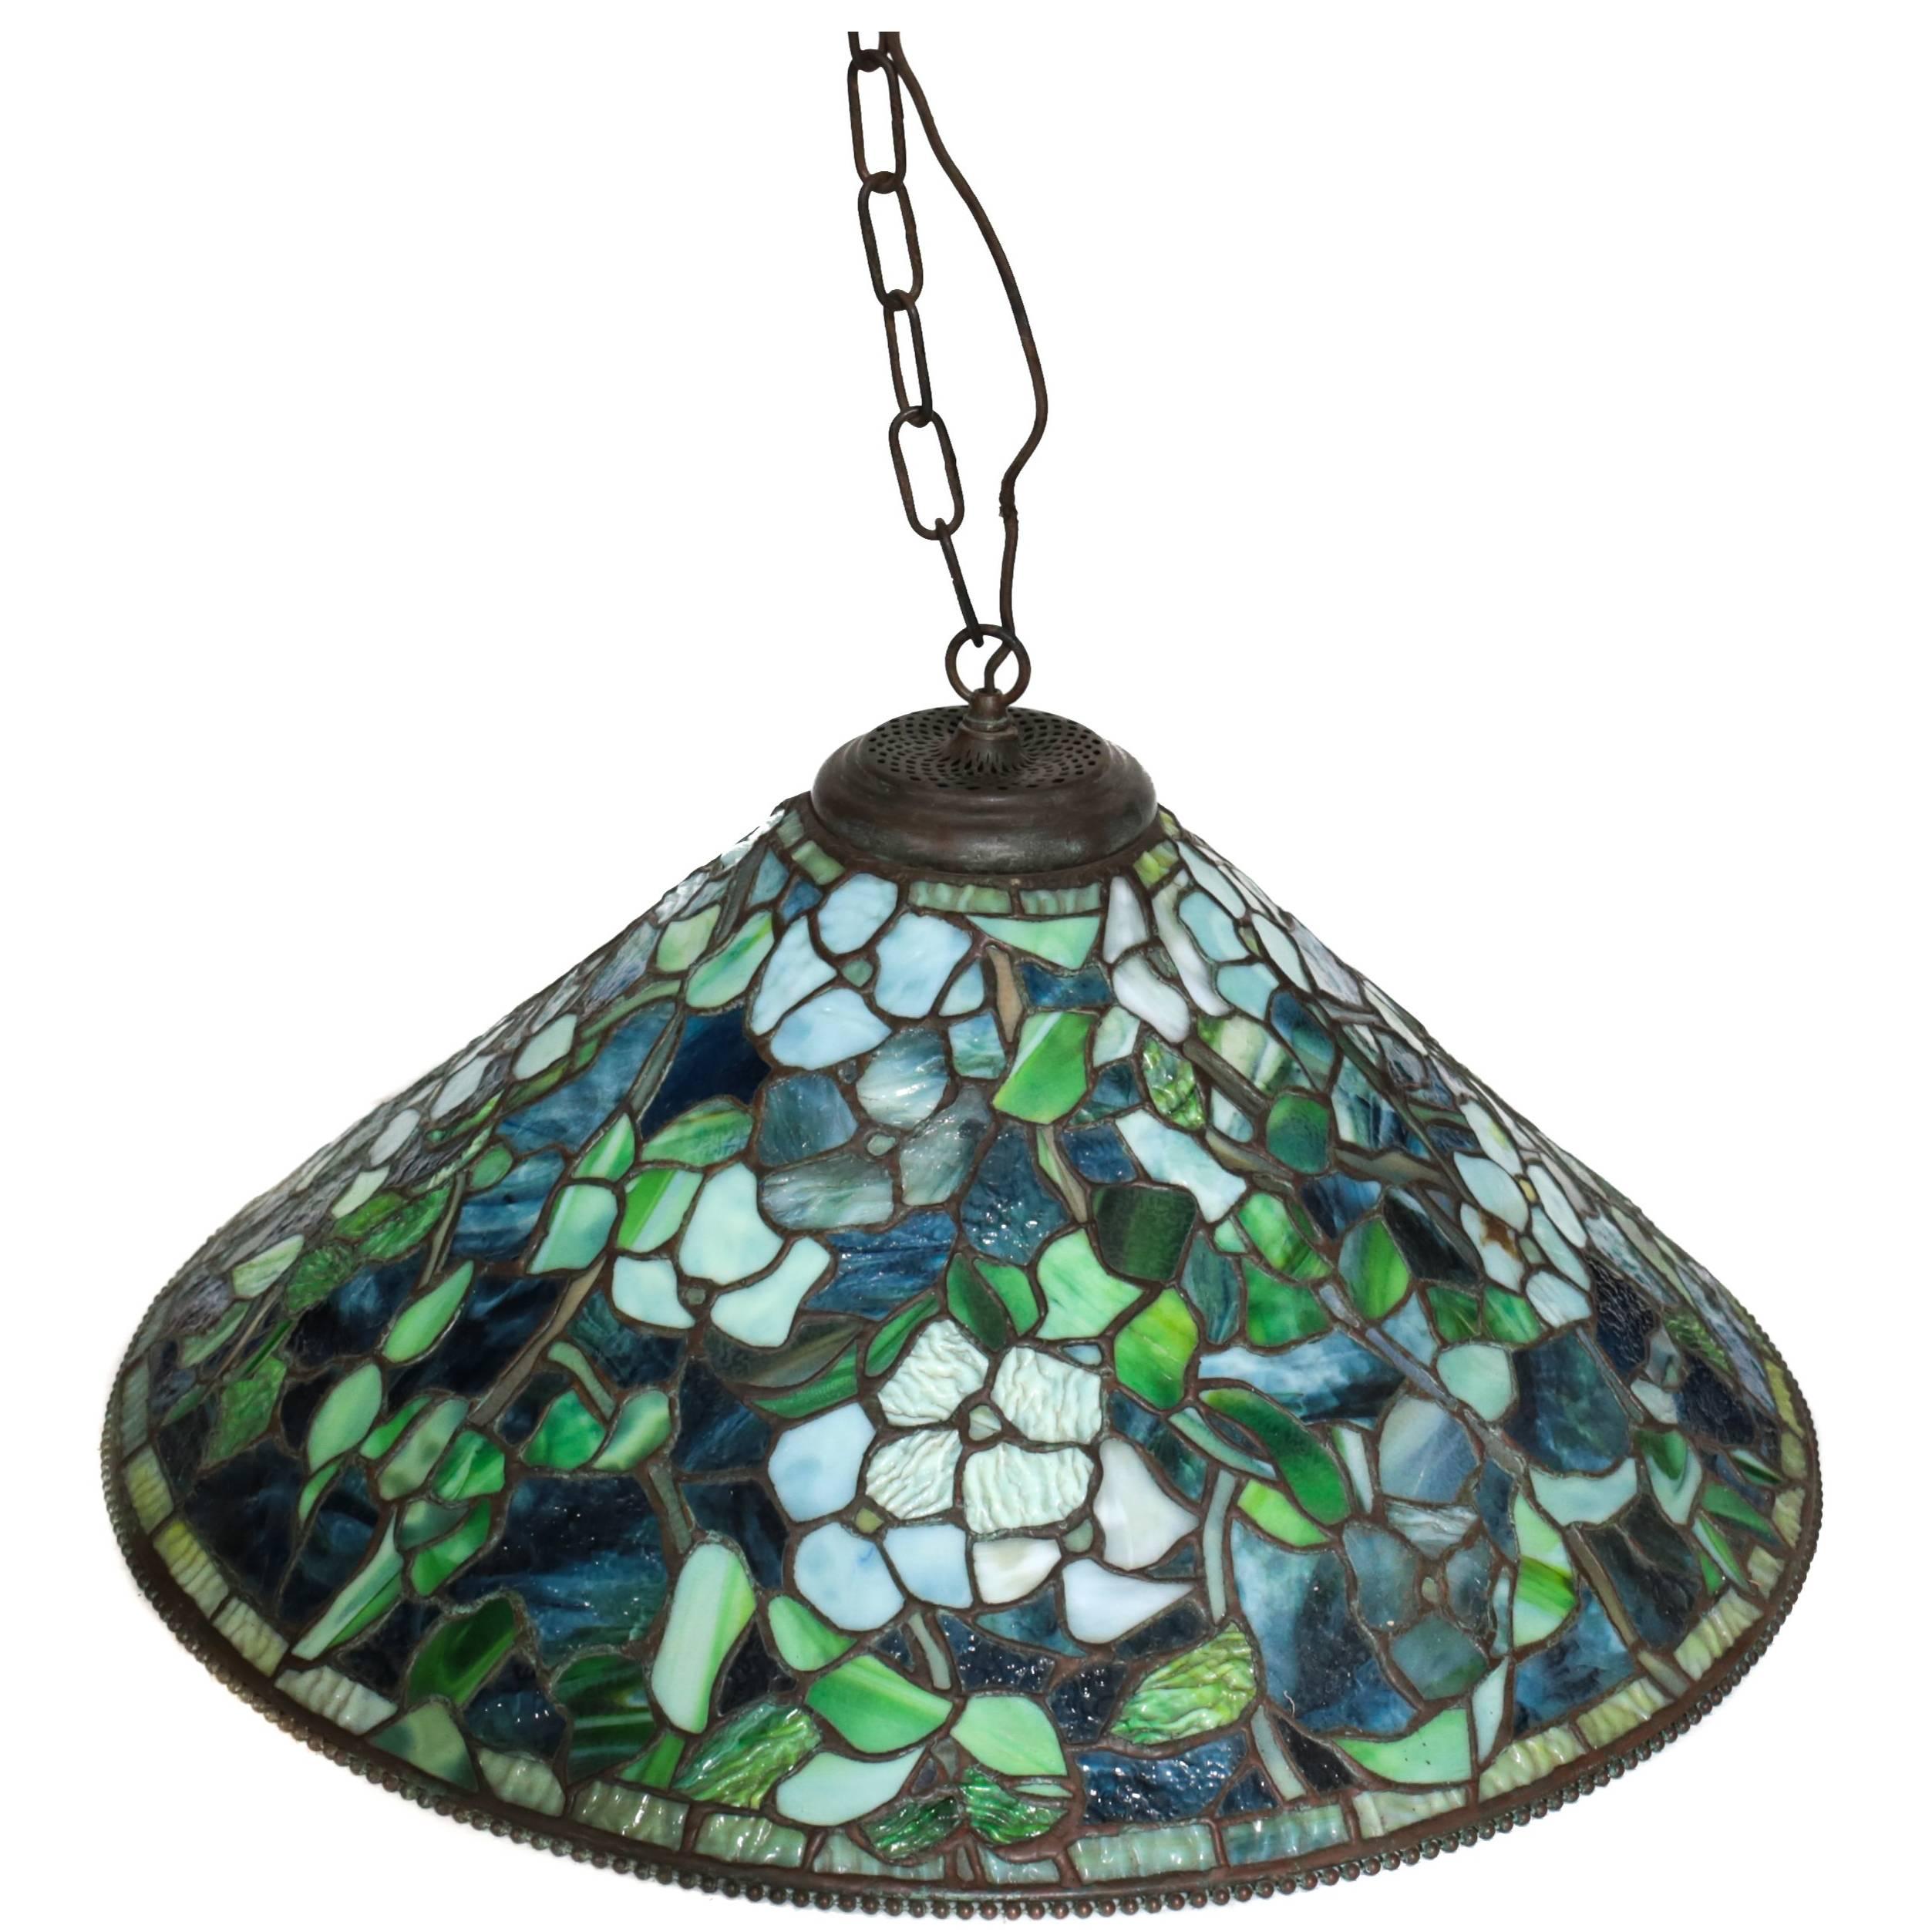 Tiffany Studios Reproduction Stained Glass Mosaic Chandelier by Paul Crist